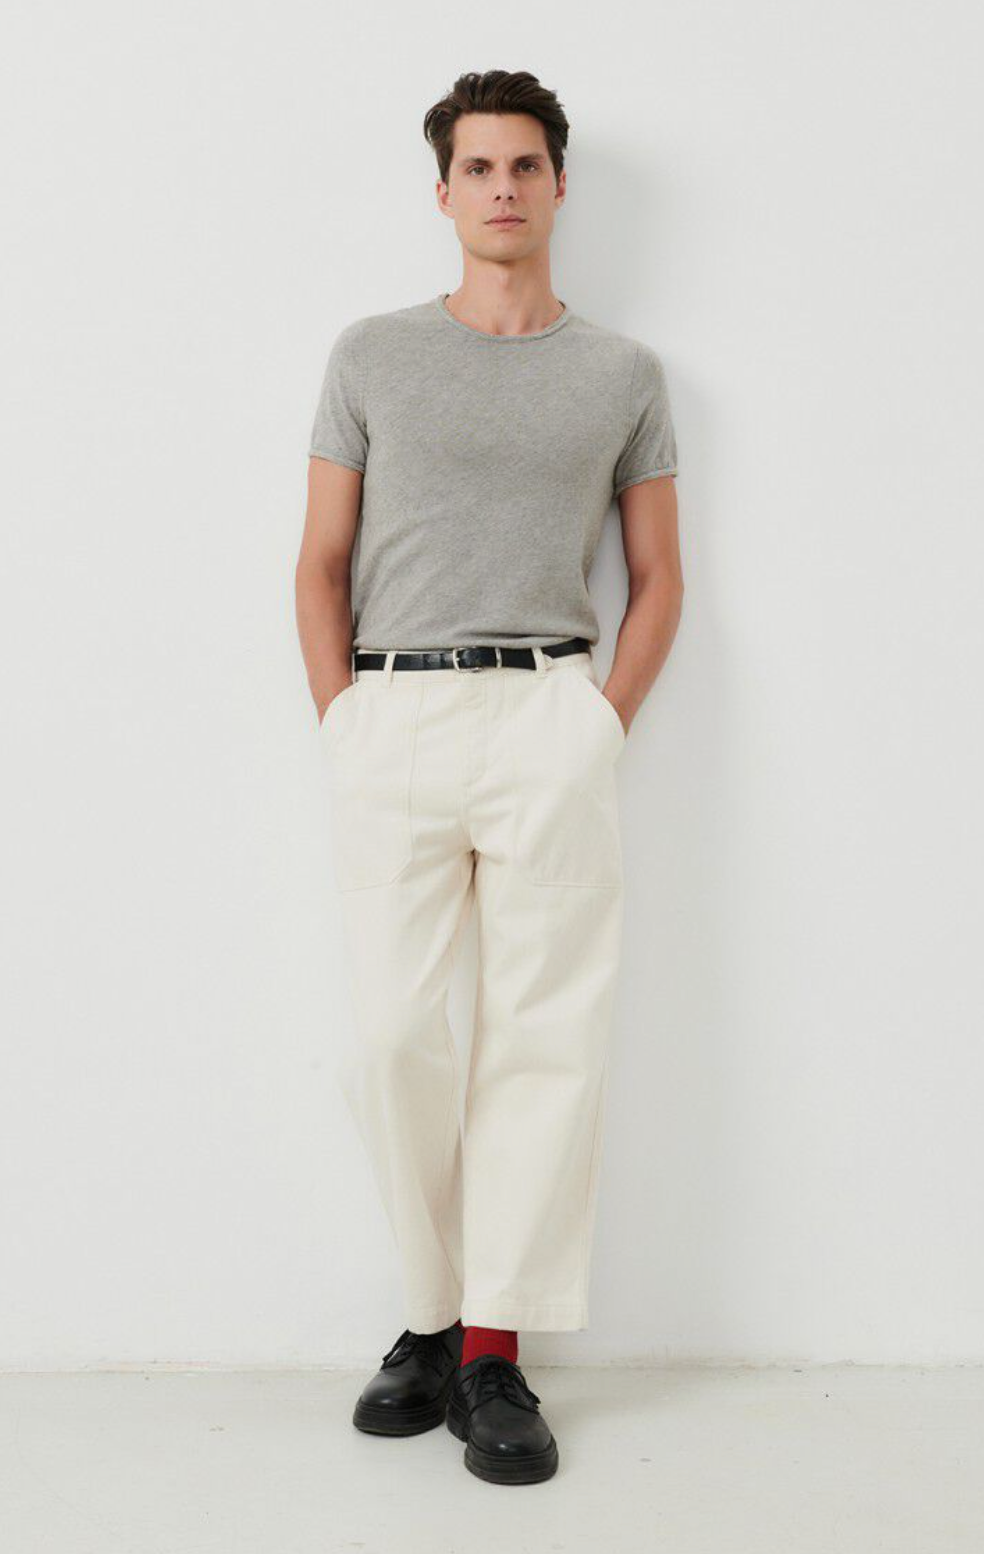 A full body image of a male model wearing the Sonoma tee shirt in grey tucked into white denim 